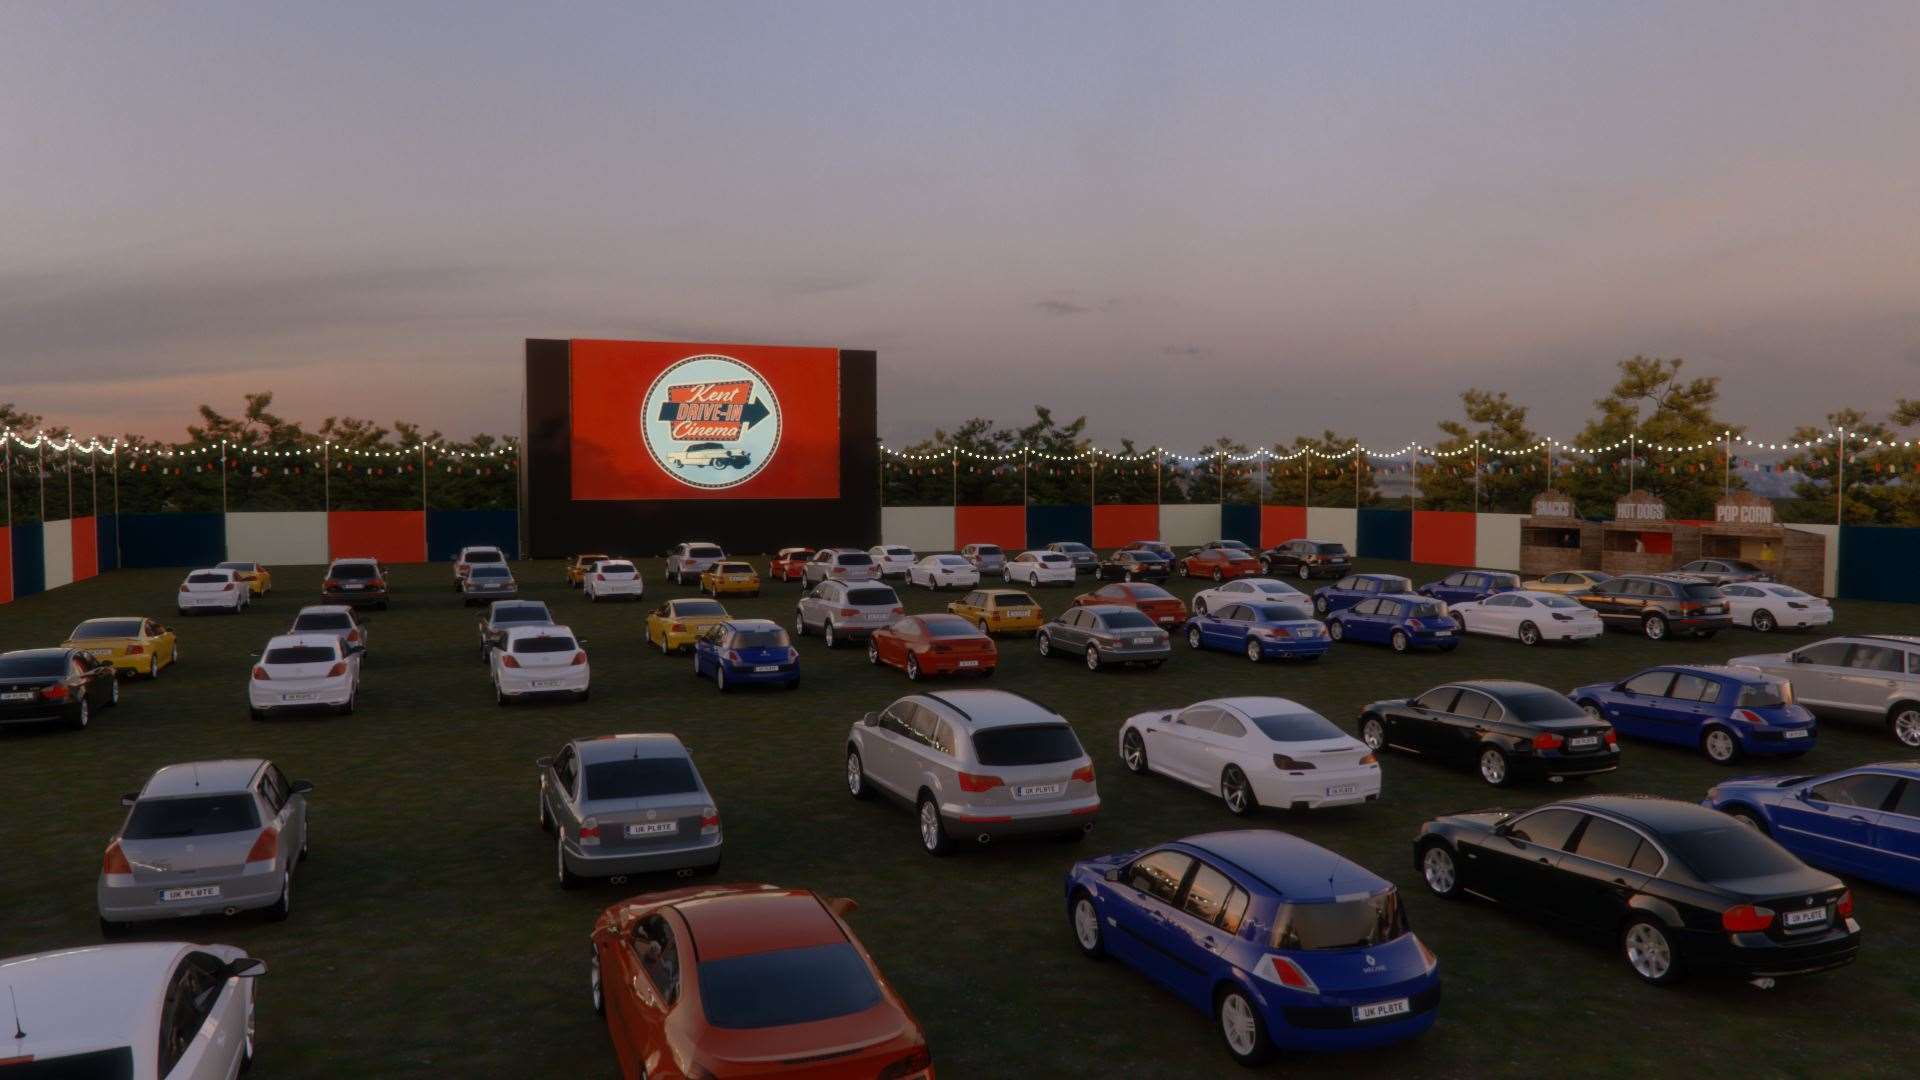 Catch a film at the drive-in cinema this weekend